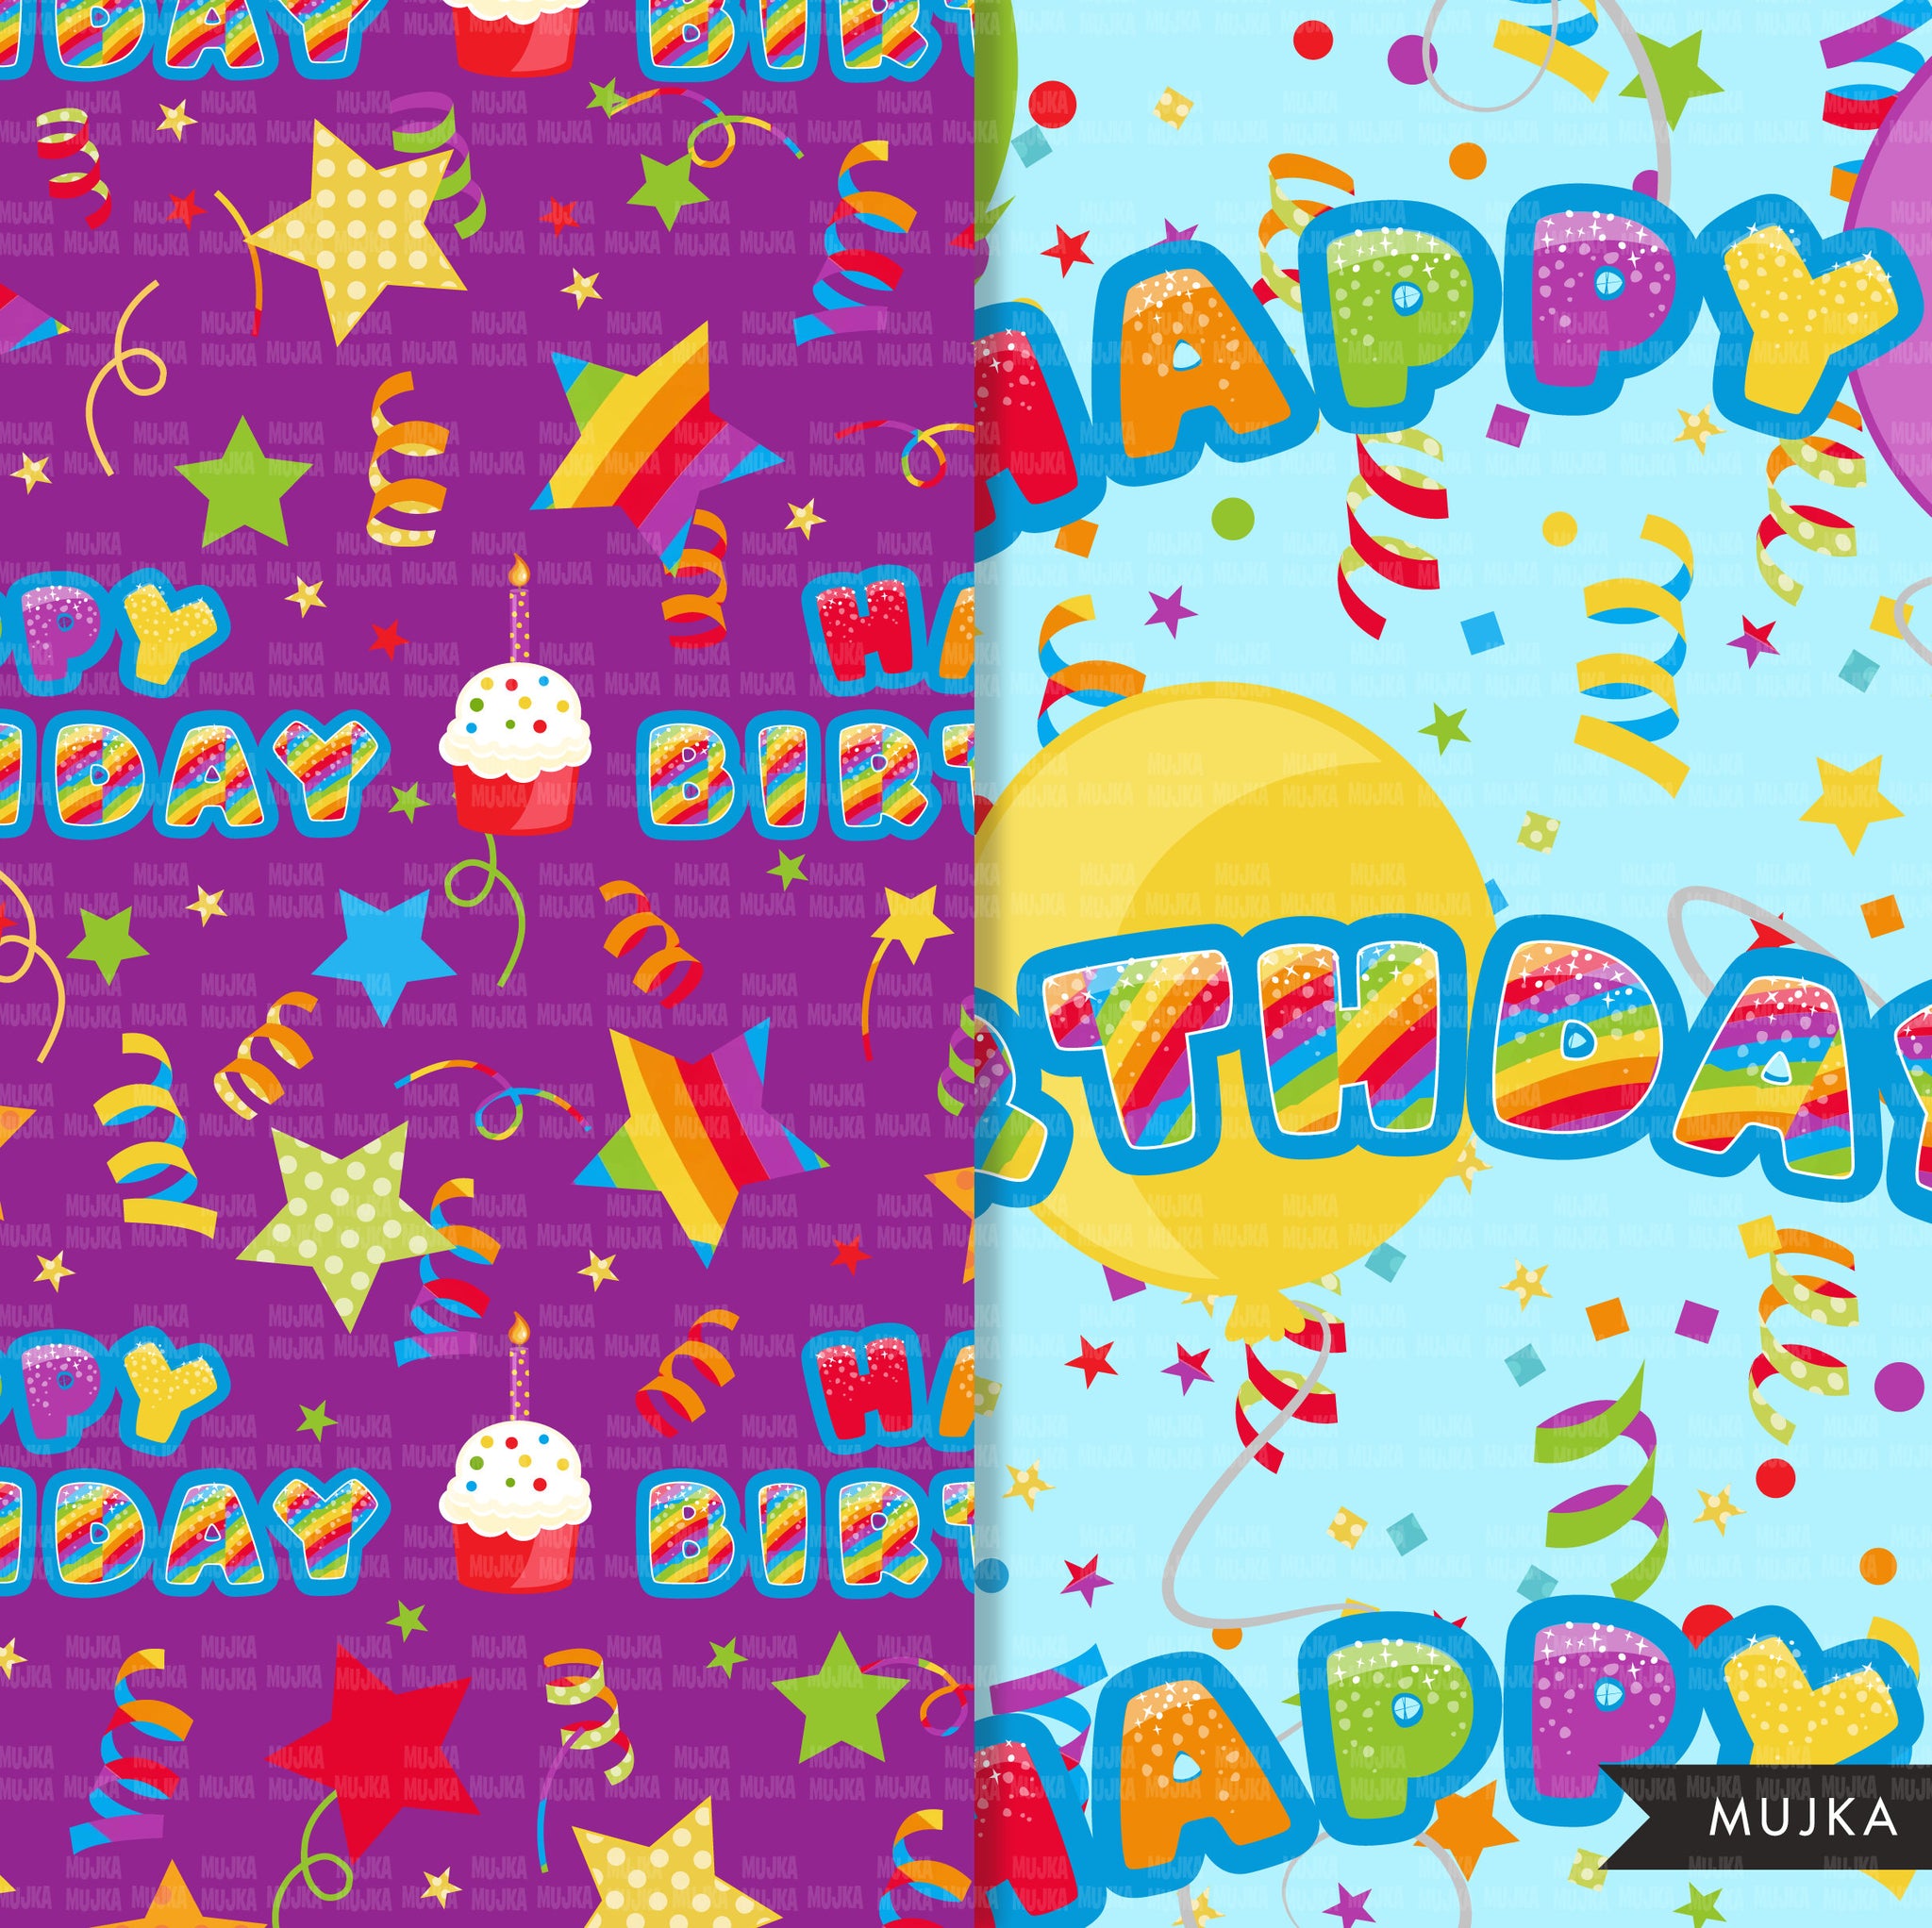 Rainbow Birthday Digital papers, seamless pattern, digital paper pack, printable pattern, digital background, birthday party papers